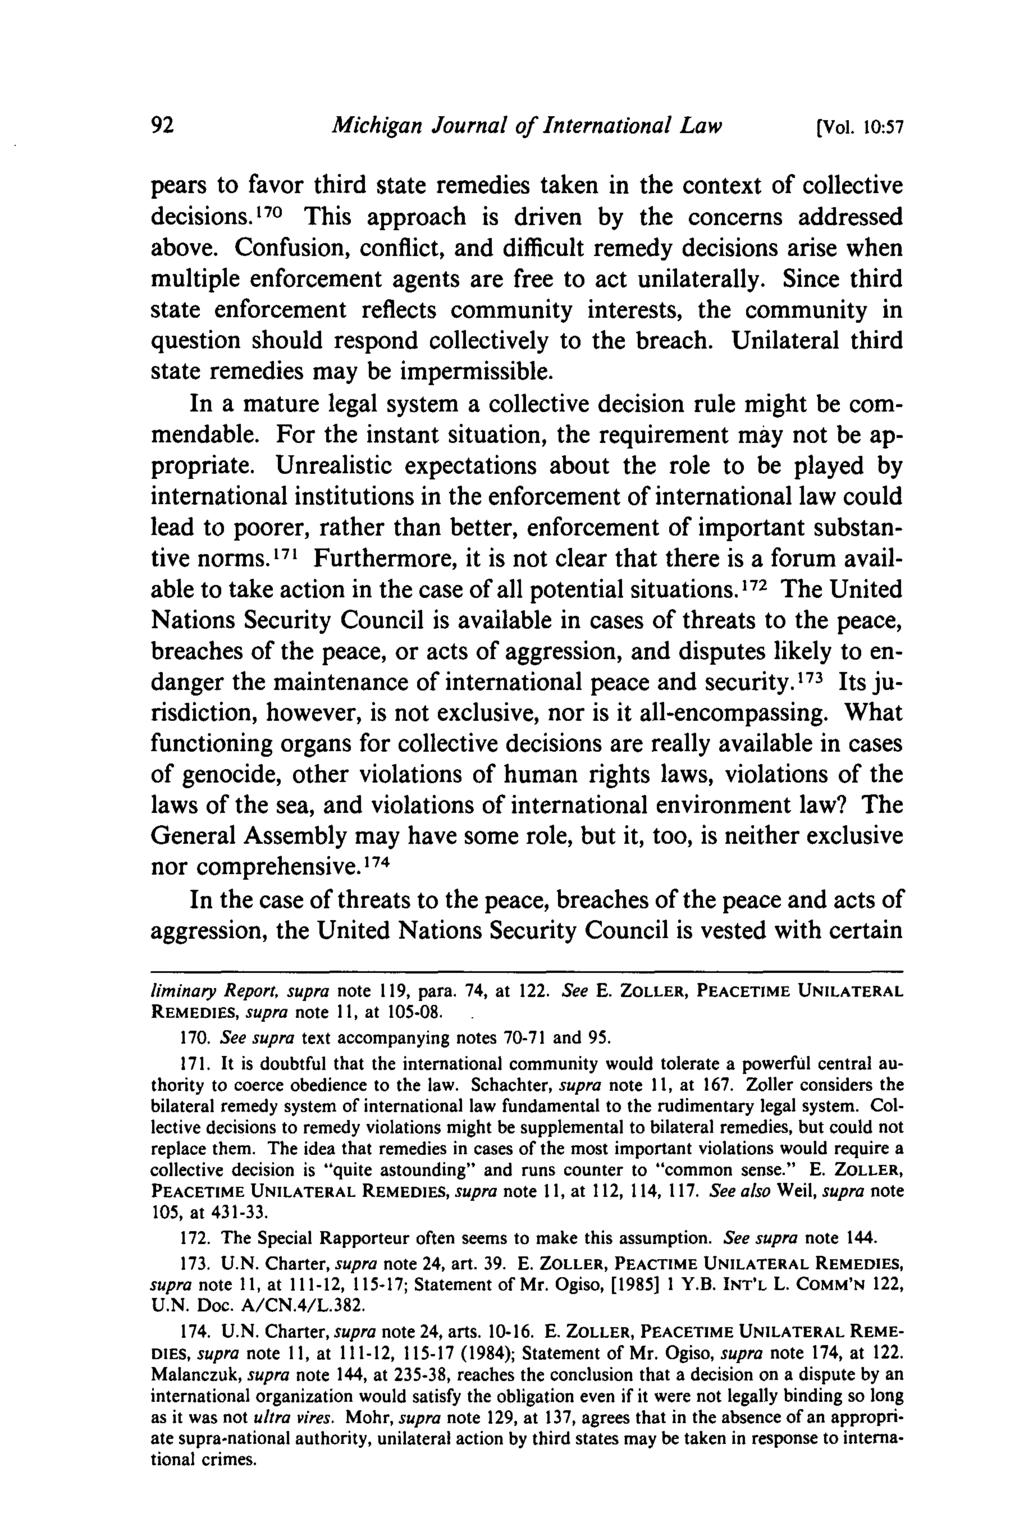 Michigan Journal of International Law (Vol. 10:57 pears to favor third state remedies taken in the context of collective decisions.' 70 This approach is driven by the concerns addressed above.